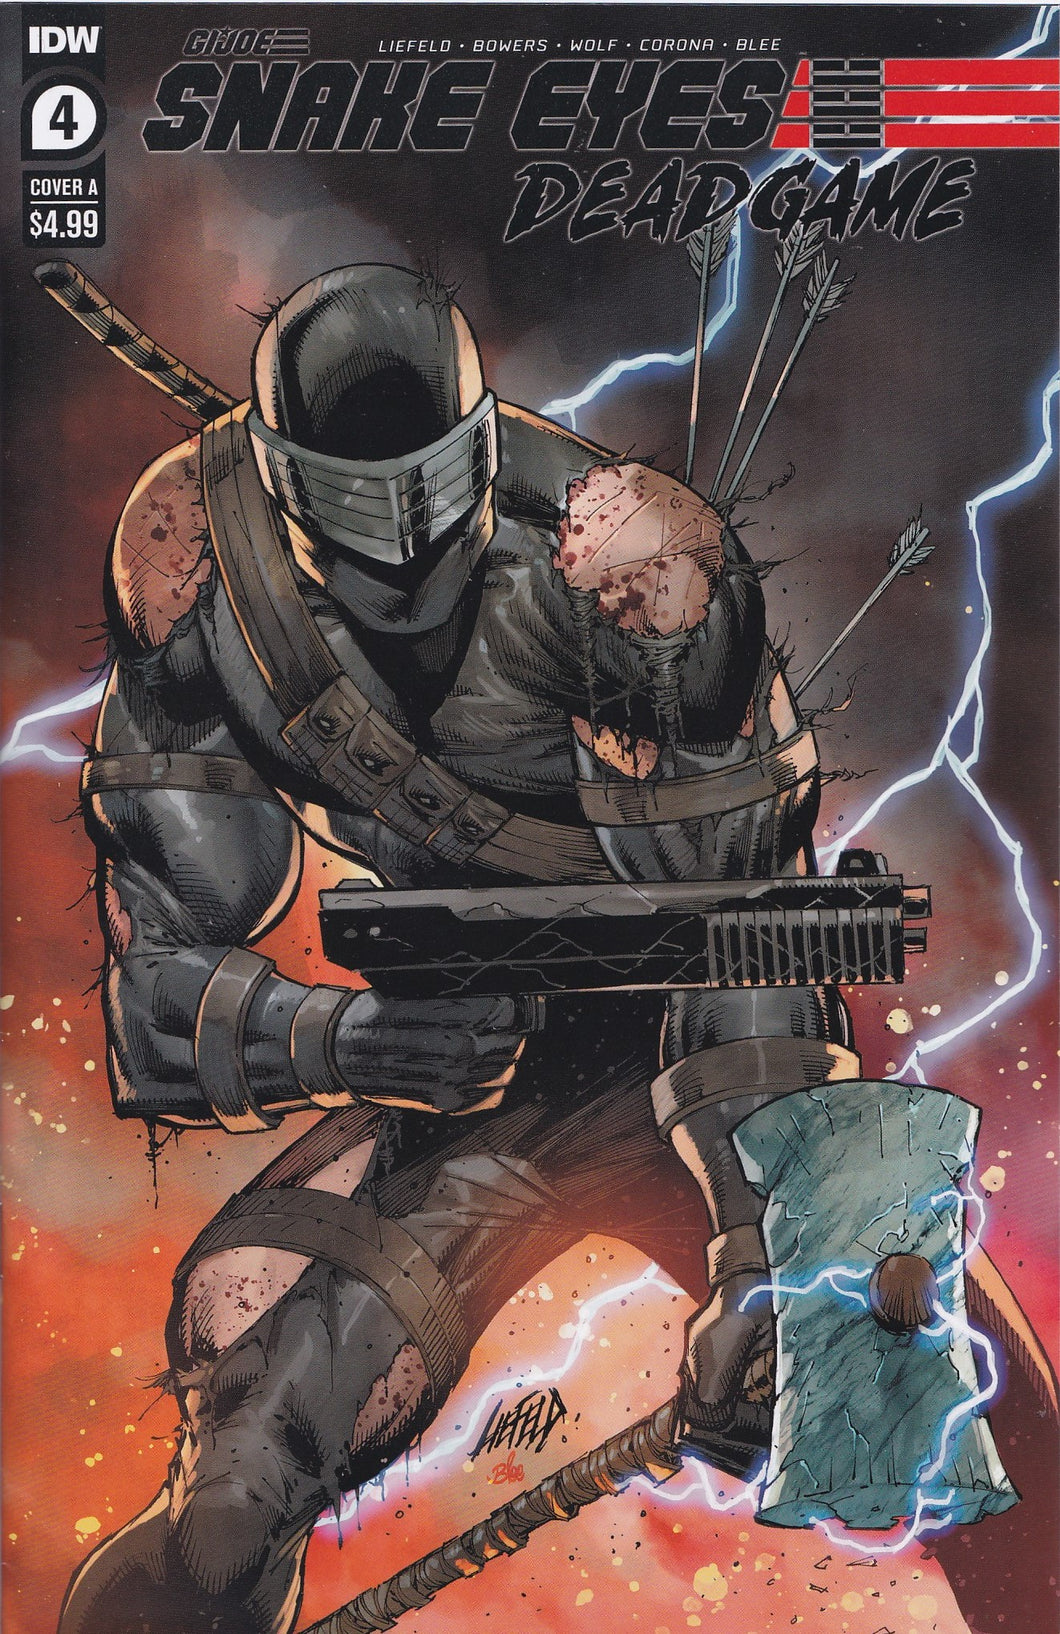 GI JOE: SNAKE EYES ~ DEAD GAME #4 (ROB LIEFELD COVER A VARIANT) ~ IDW